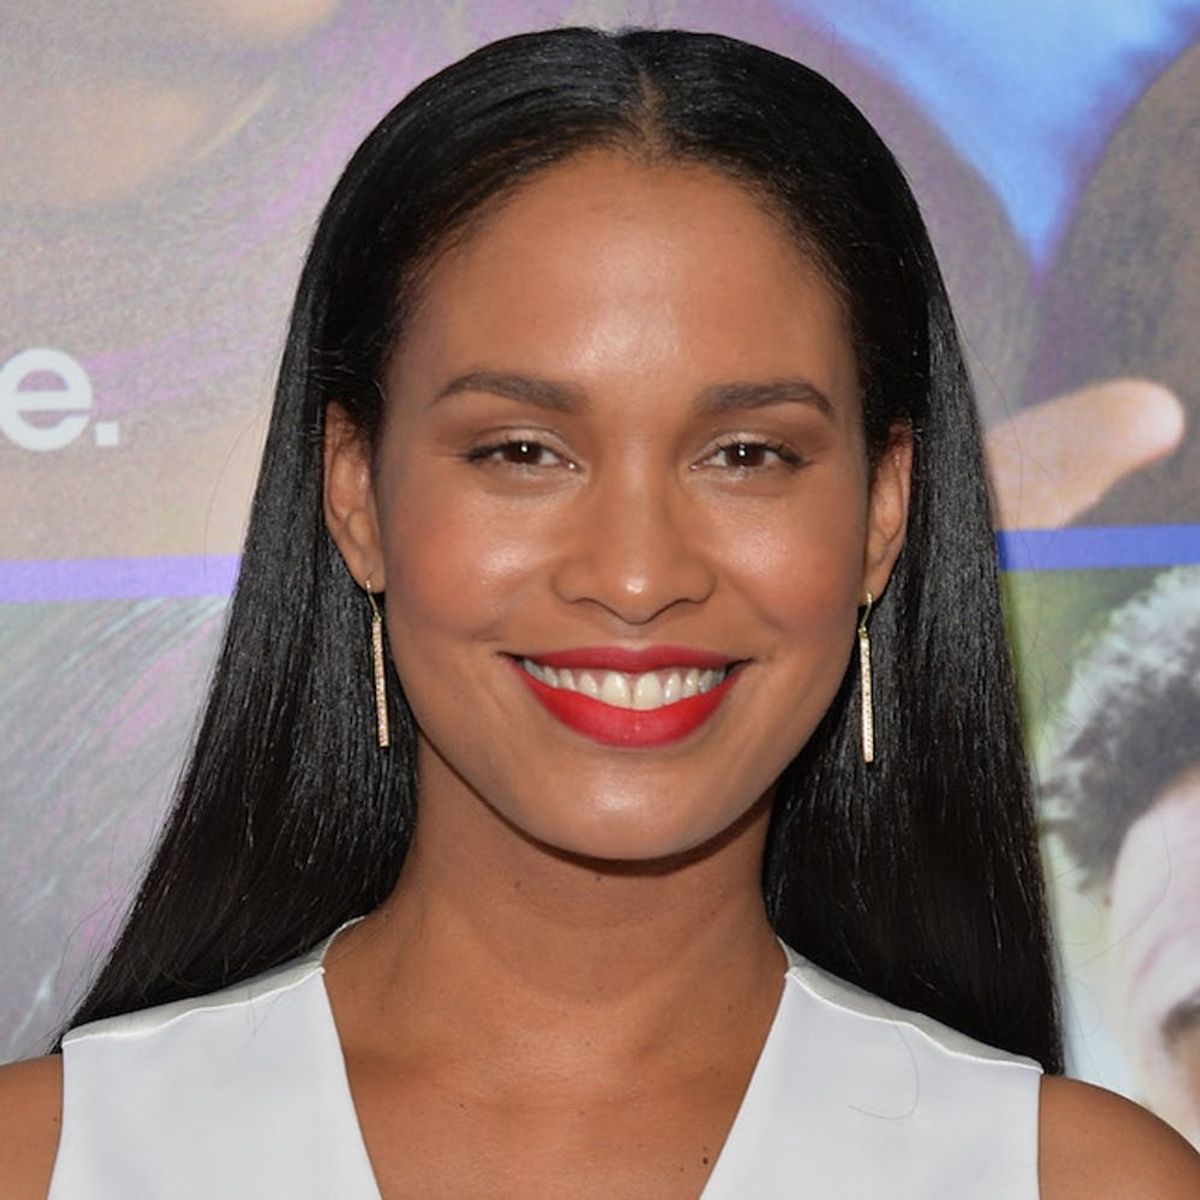 Get the Look of Joy Bryant’s Gorgeous Granny-Chic Home